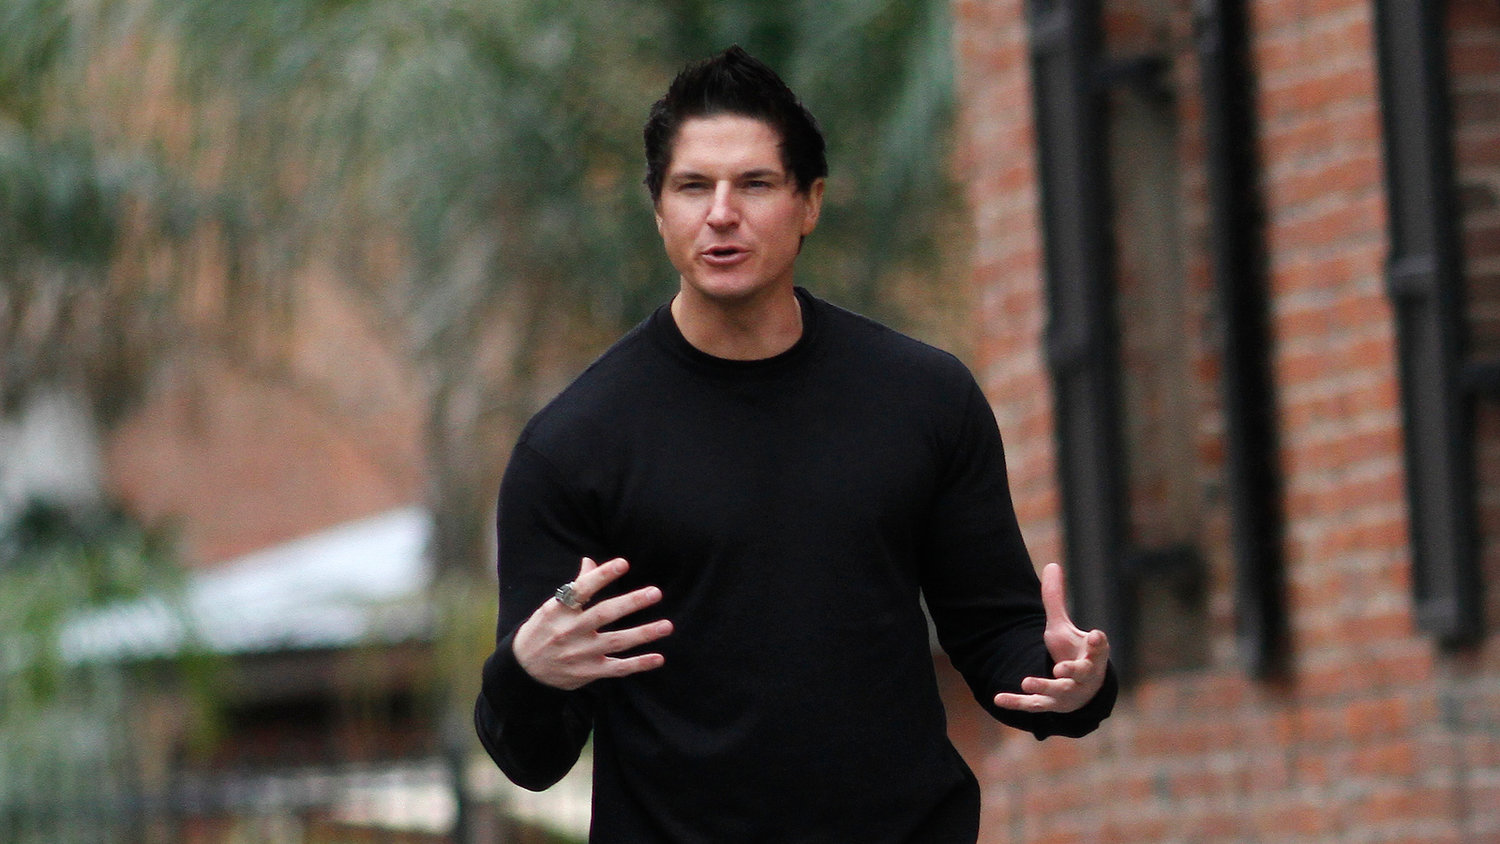 Zak Bagans Made A Haunted House Documentary - CHILDREN OF THE ADAMS.